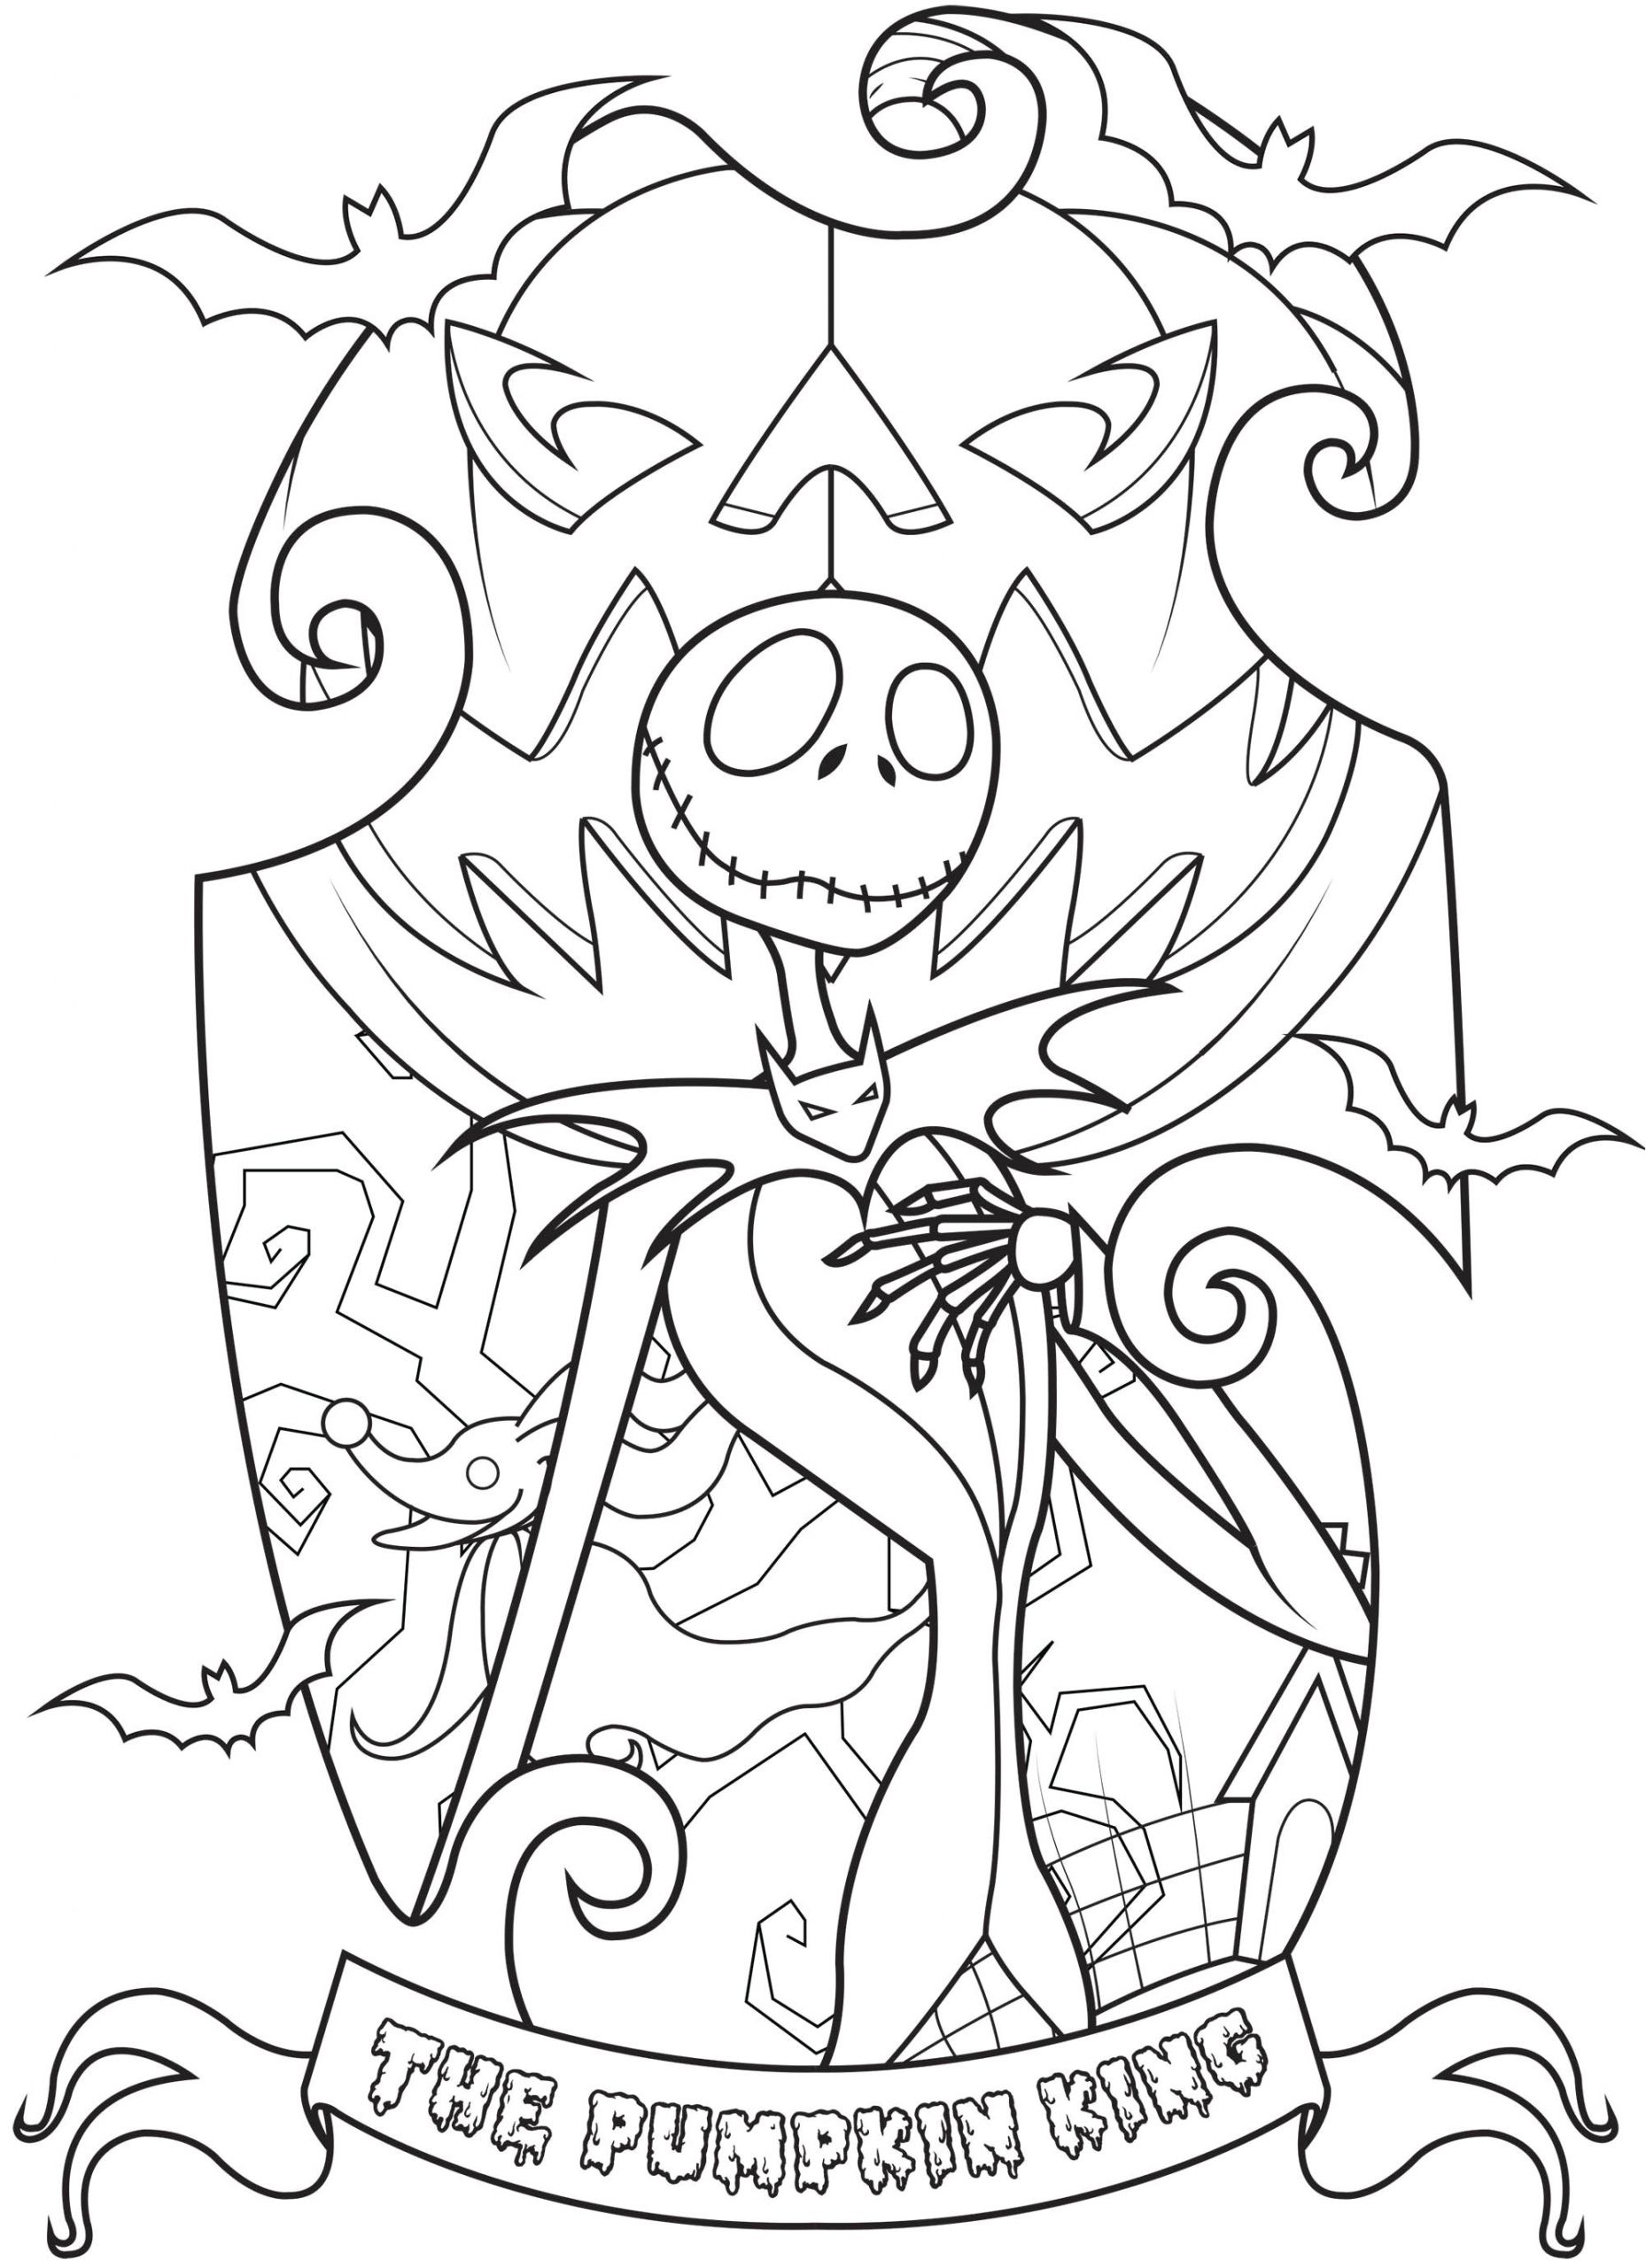 coloriage squelette inspirant coloriage noel halloween collection of coloriage squelette